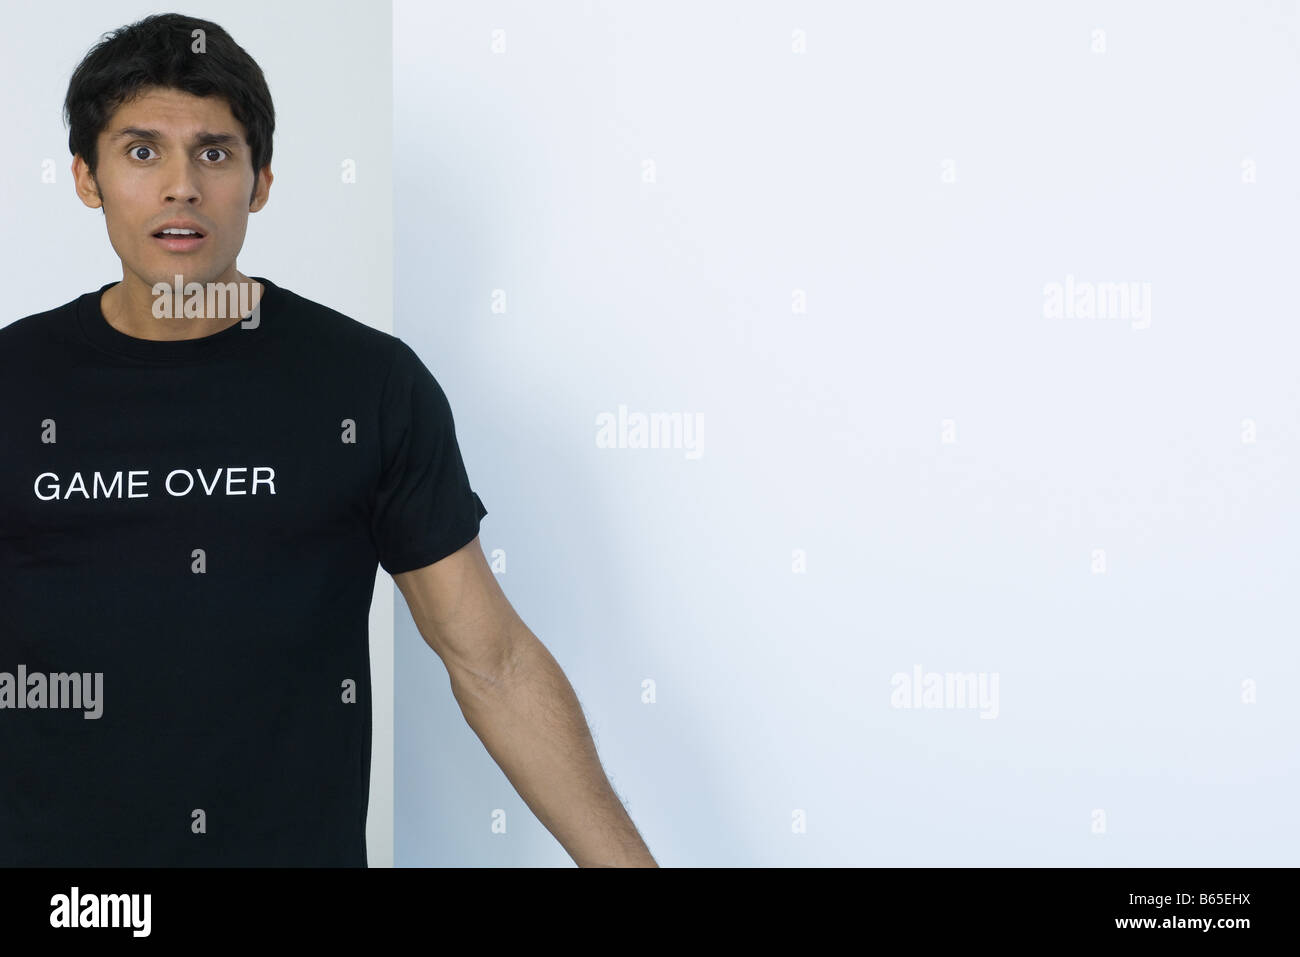 Man wearing tee-shirt printed with the words "game over" Stock Photo